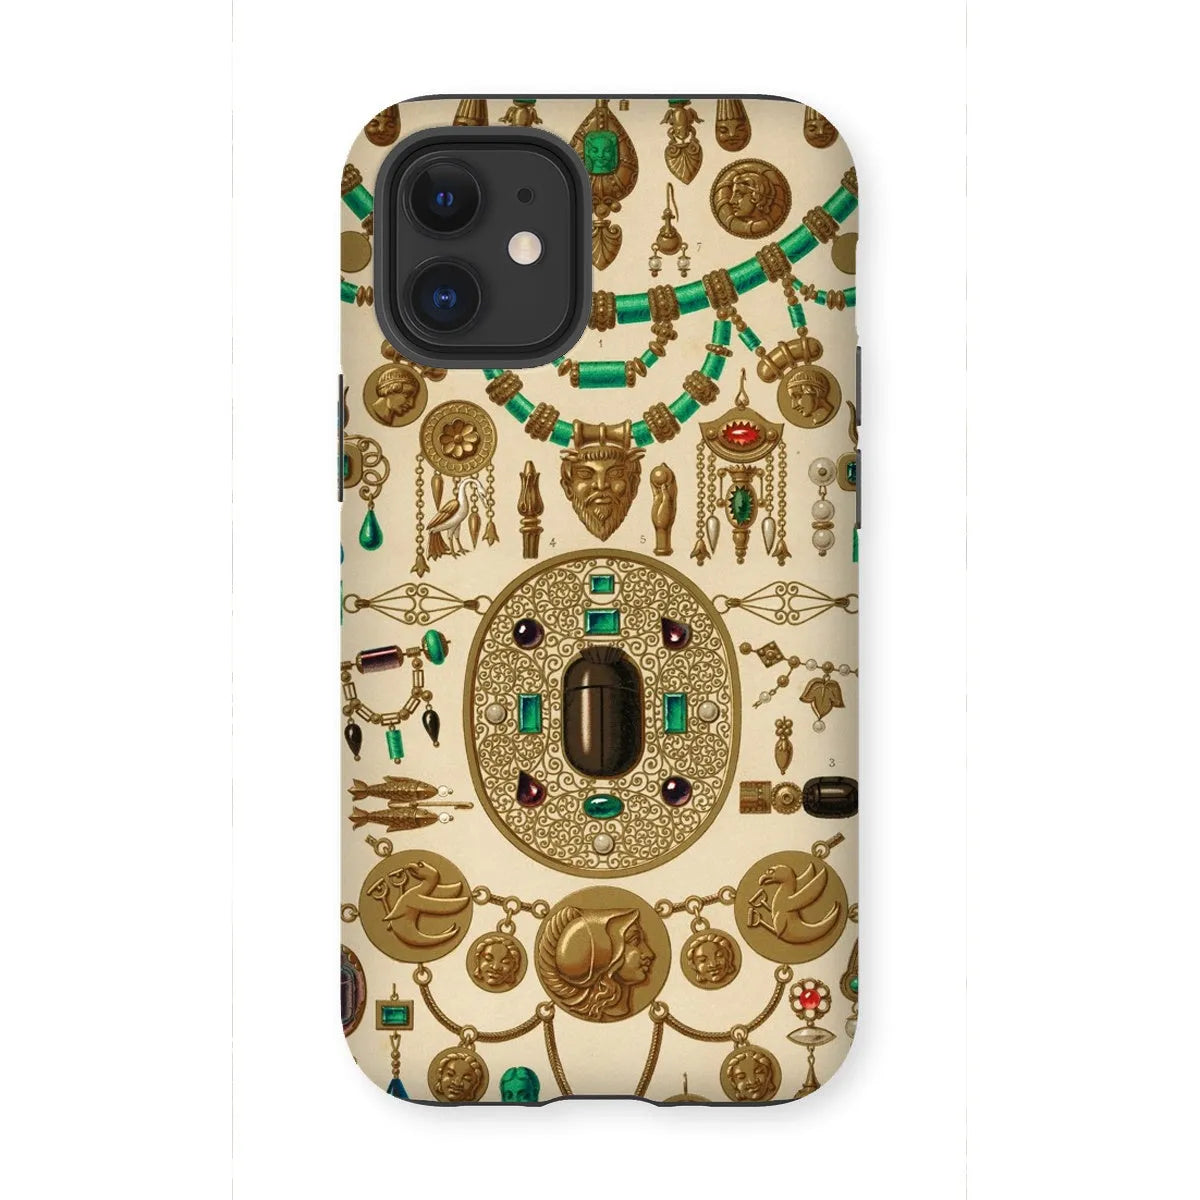 Etruscan Jewelry By Auguste Racinet Art Phone Case - Iphone 12 Mini / Matte - Mobile Phone Cases - Aesthetic Art